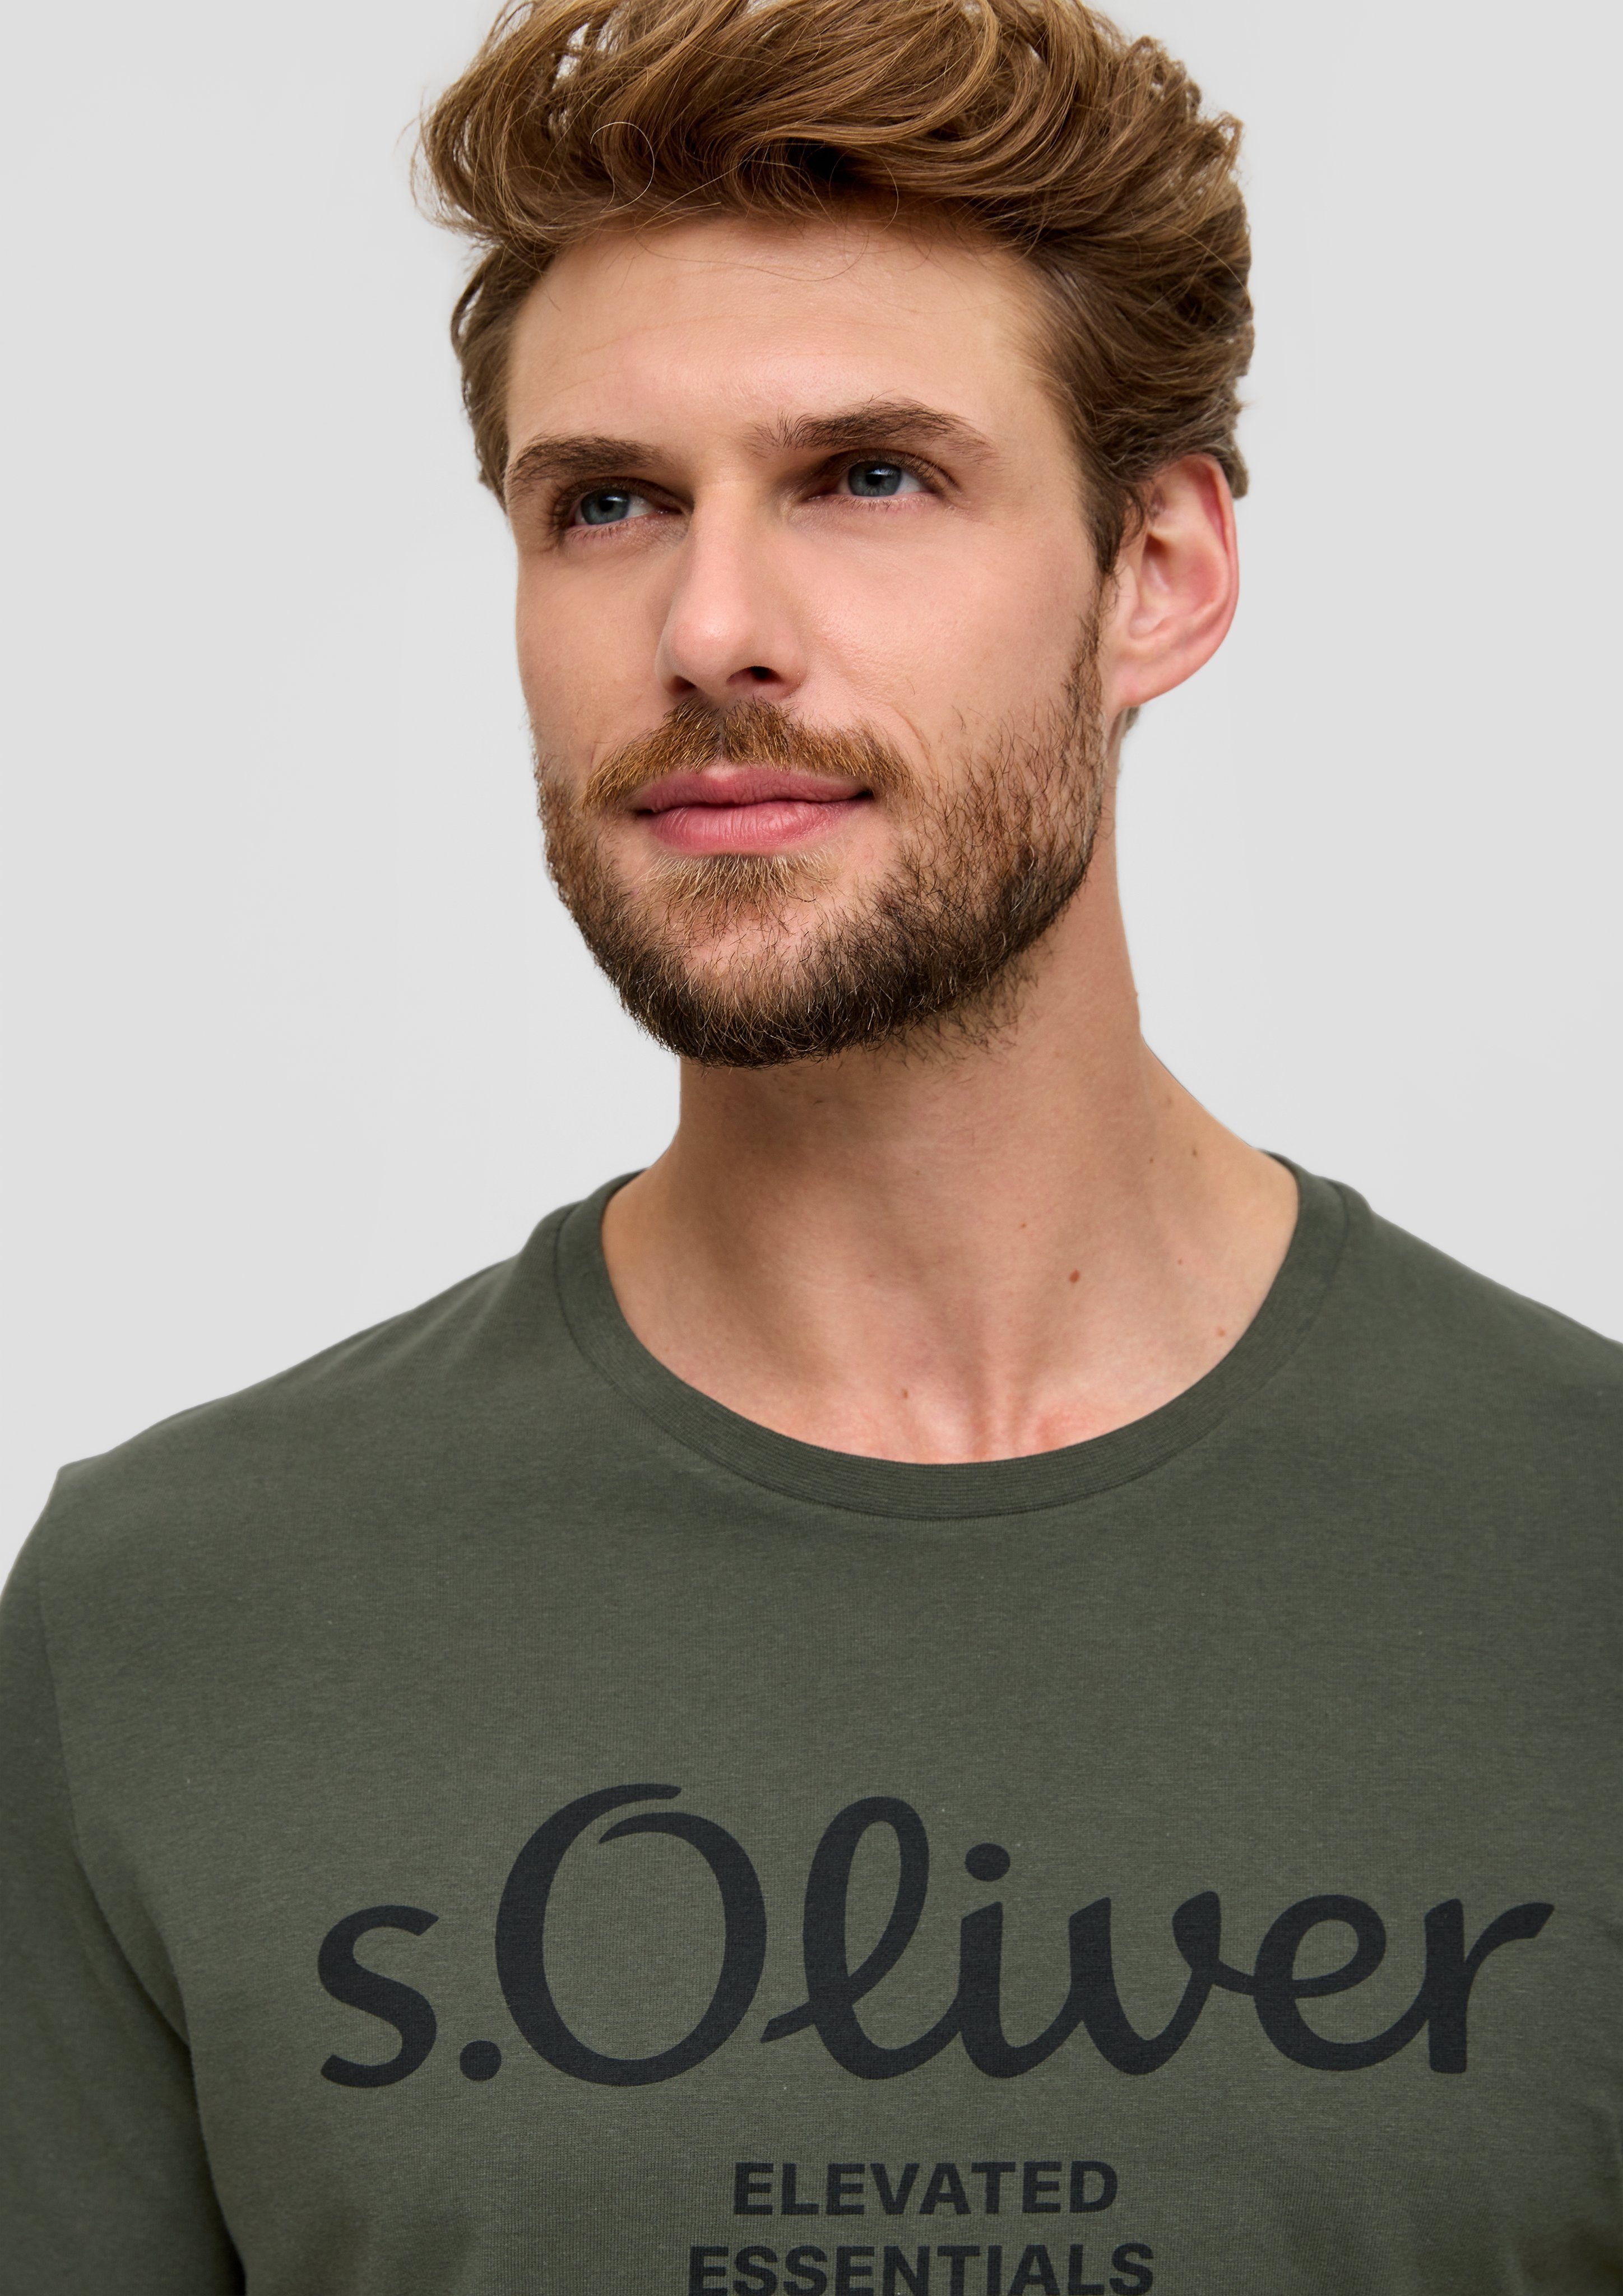 s.Oliver T-Shirt green im Look sportiven